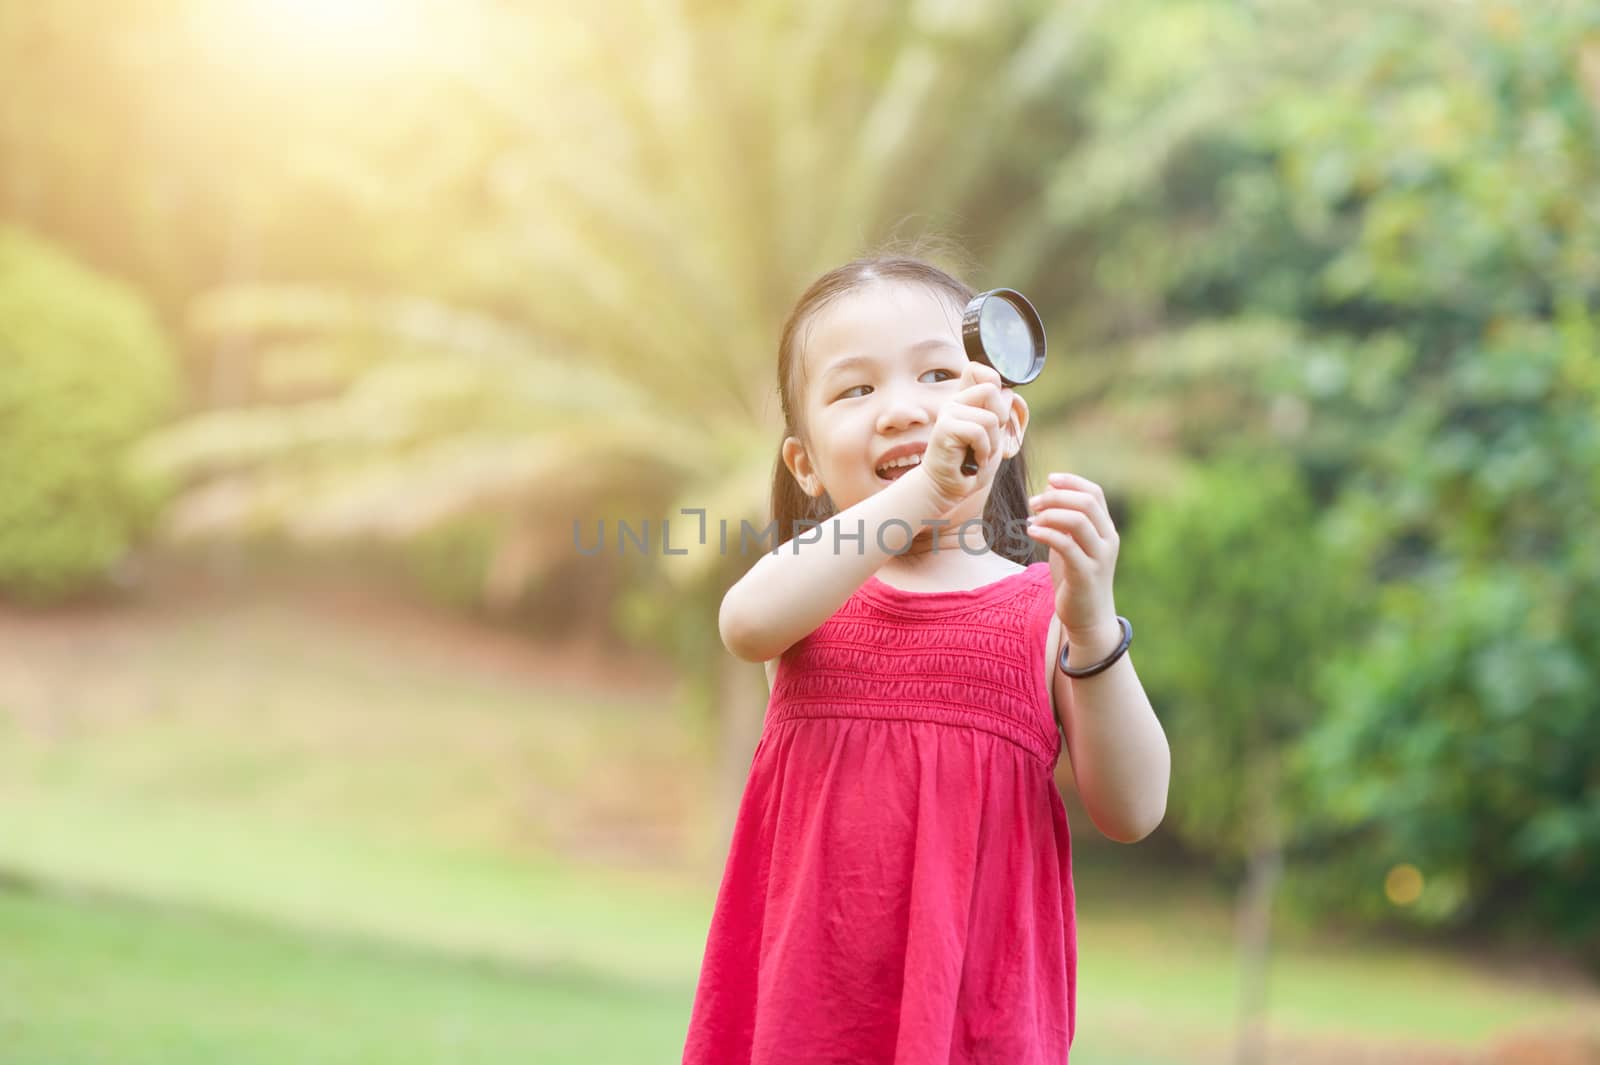 Portrait of Asian girl with magnifier glass exploring nature at park. Kid having fun outdoors. Morning sun flare background.